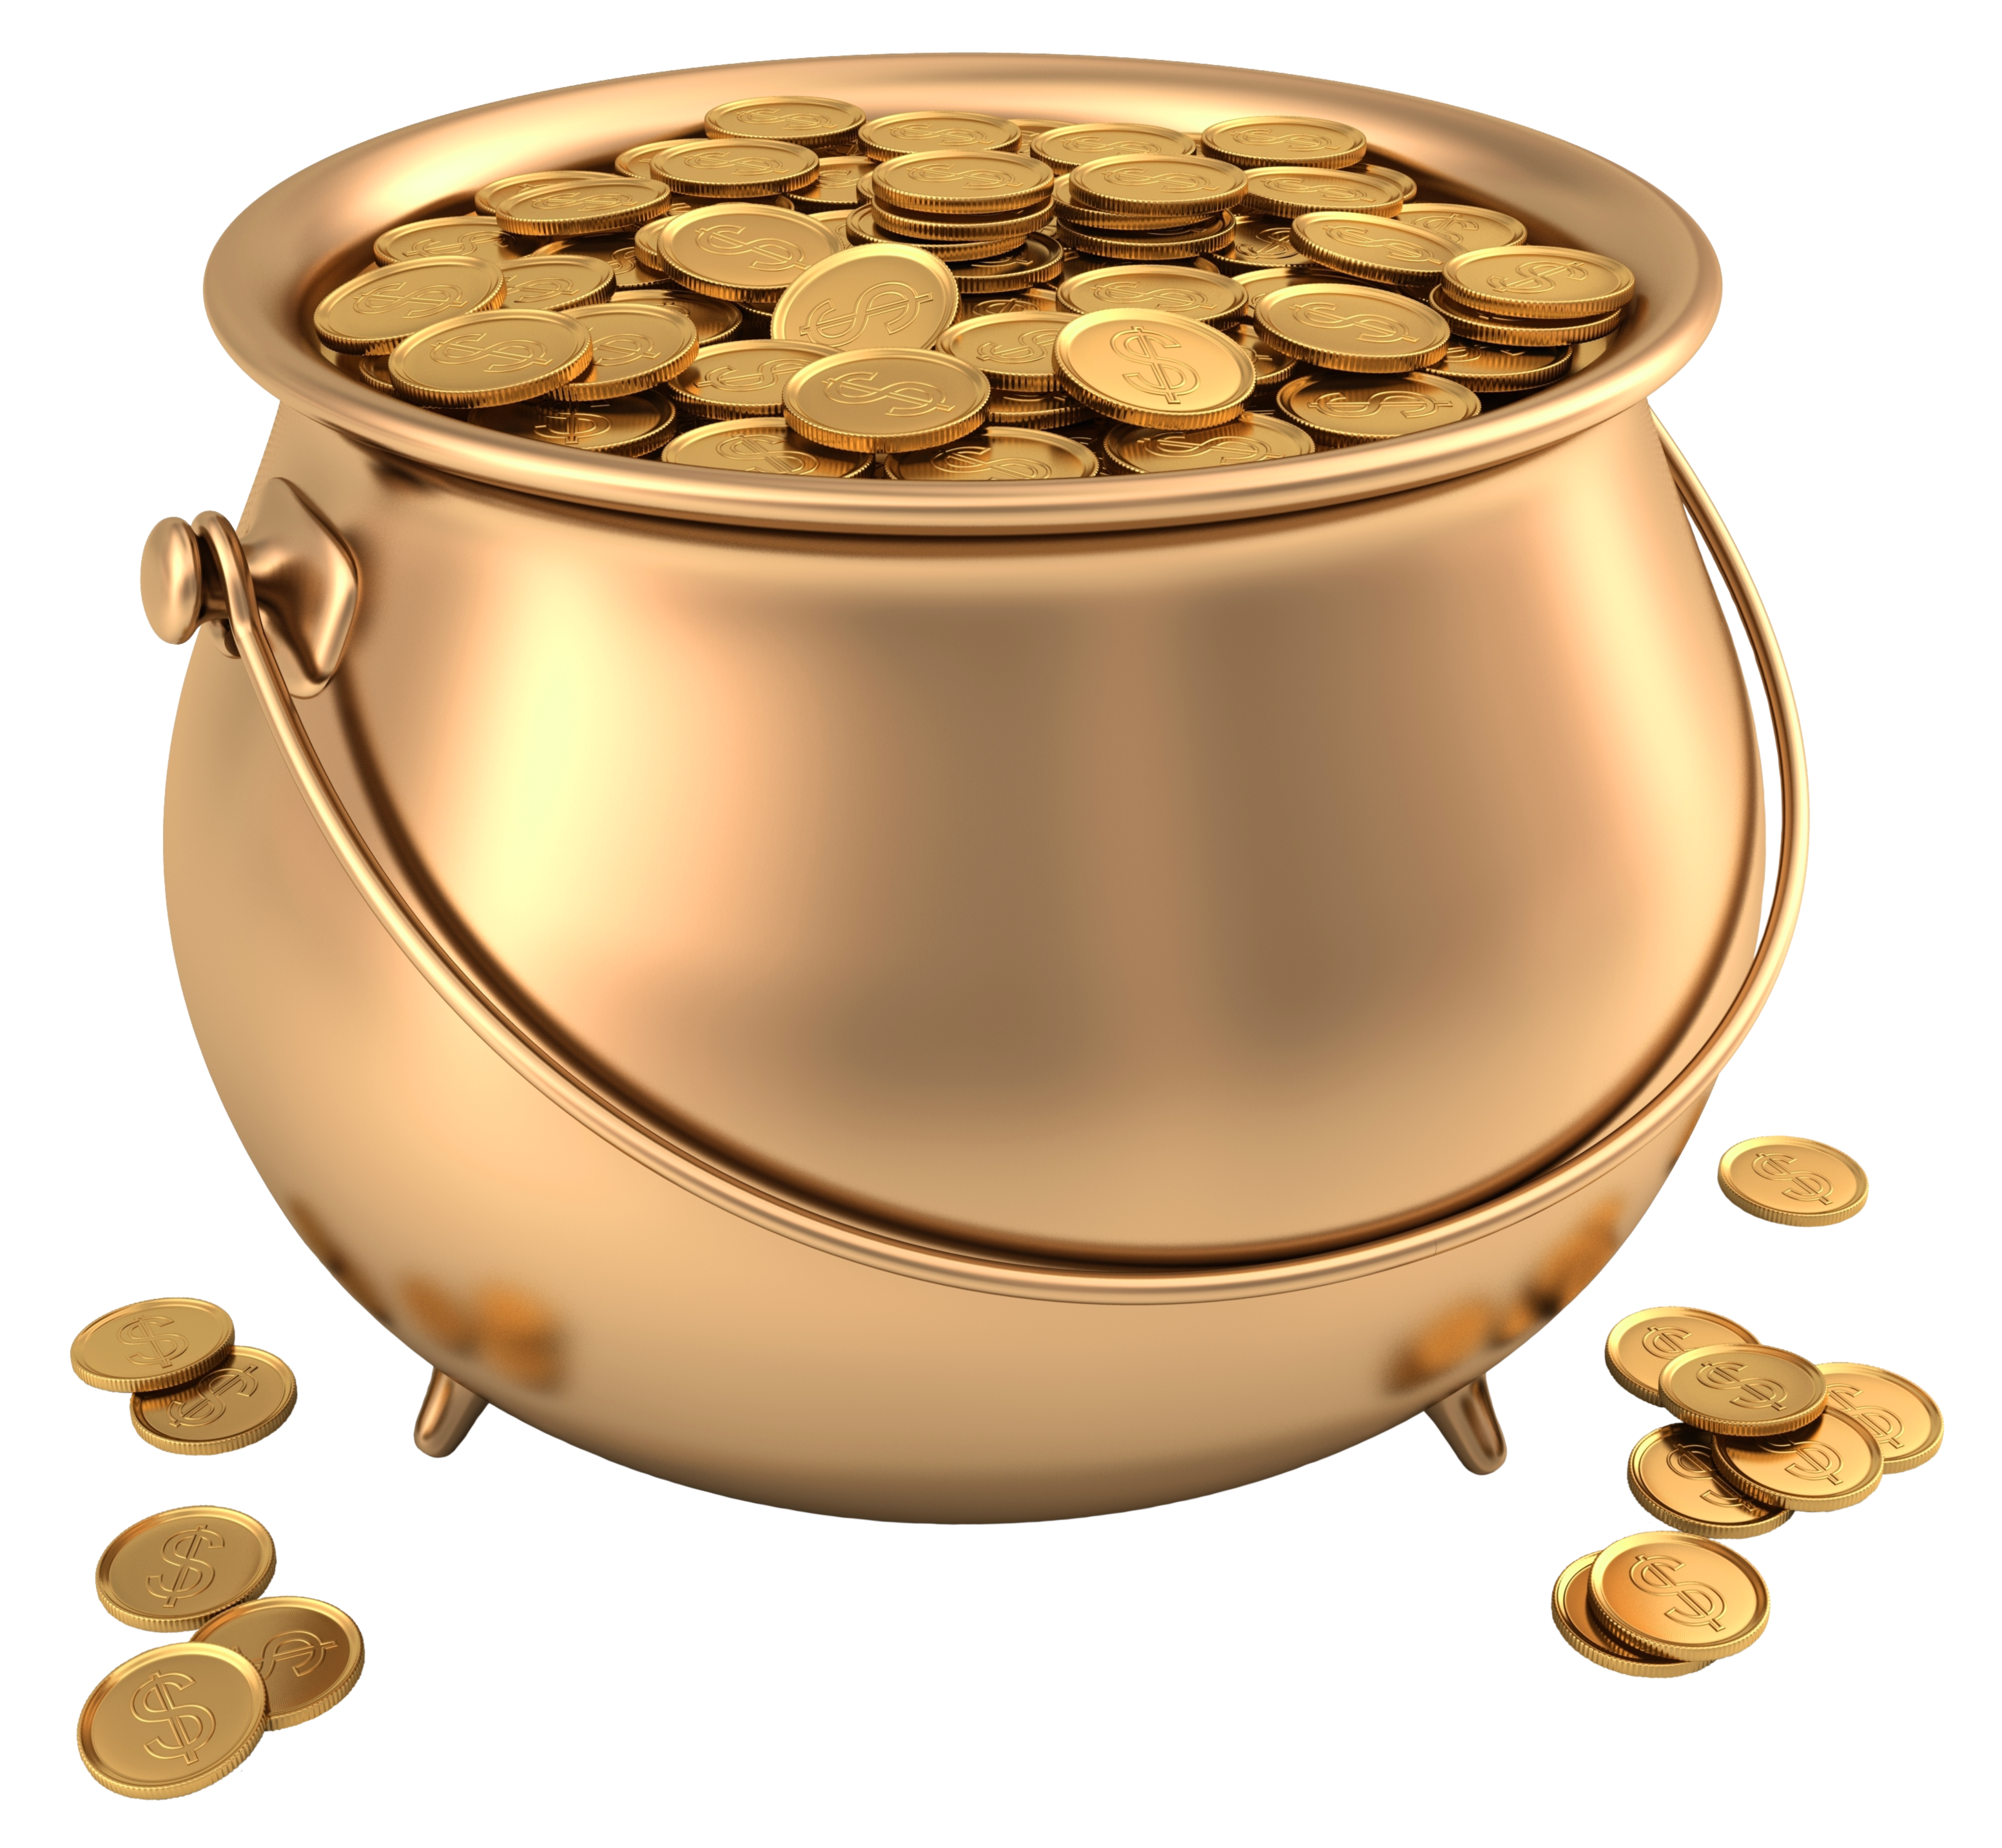 Pot of Gold PNG Picture Clipart